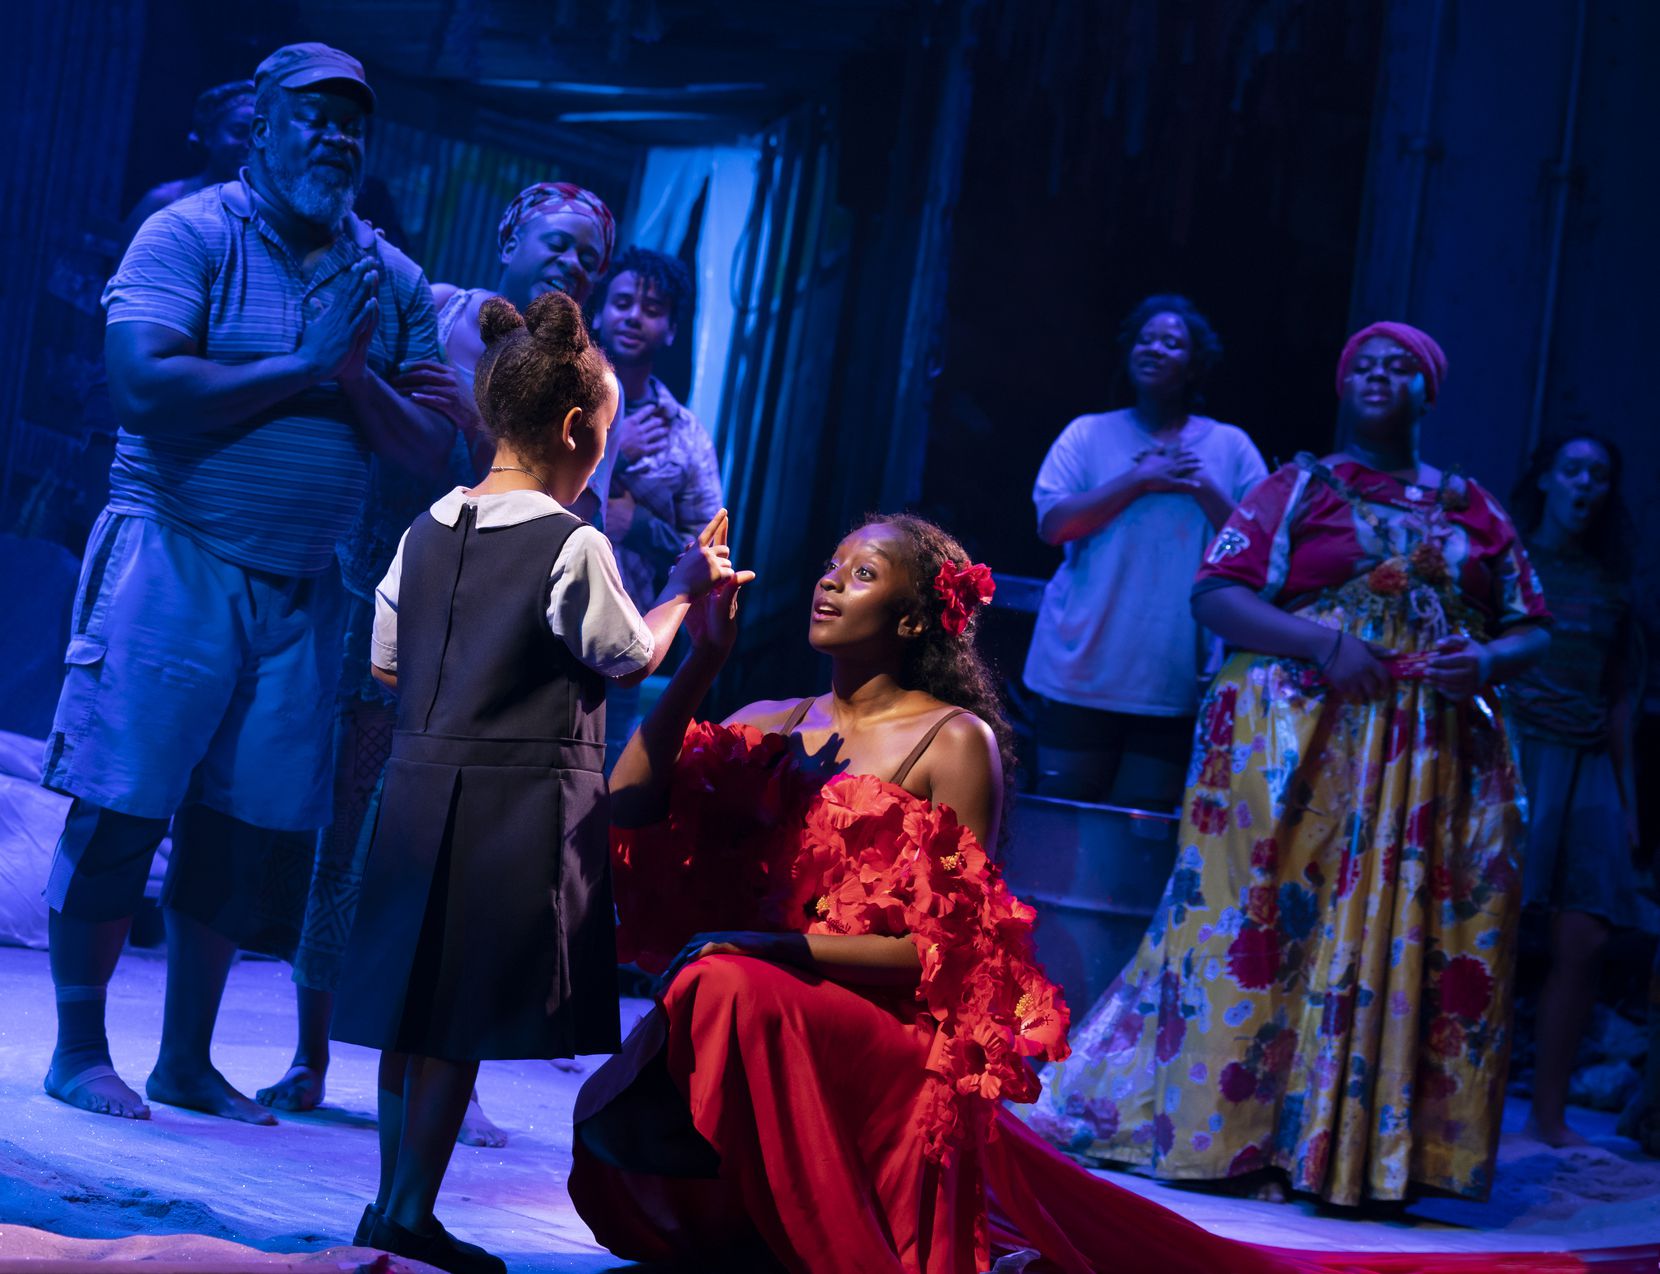 Mimi Crossland as the Little Girl and Courtnee Carter as Ti Moune in the North American tour of "Once on This Island."